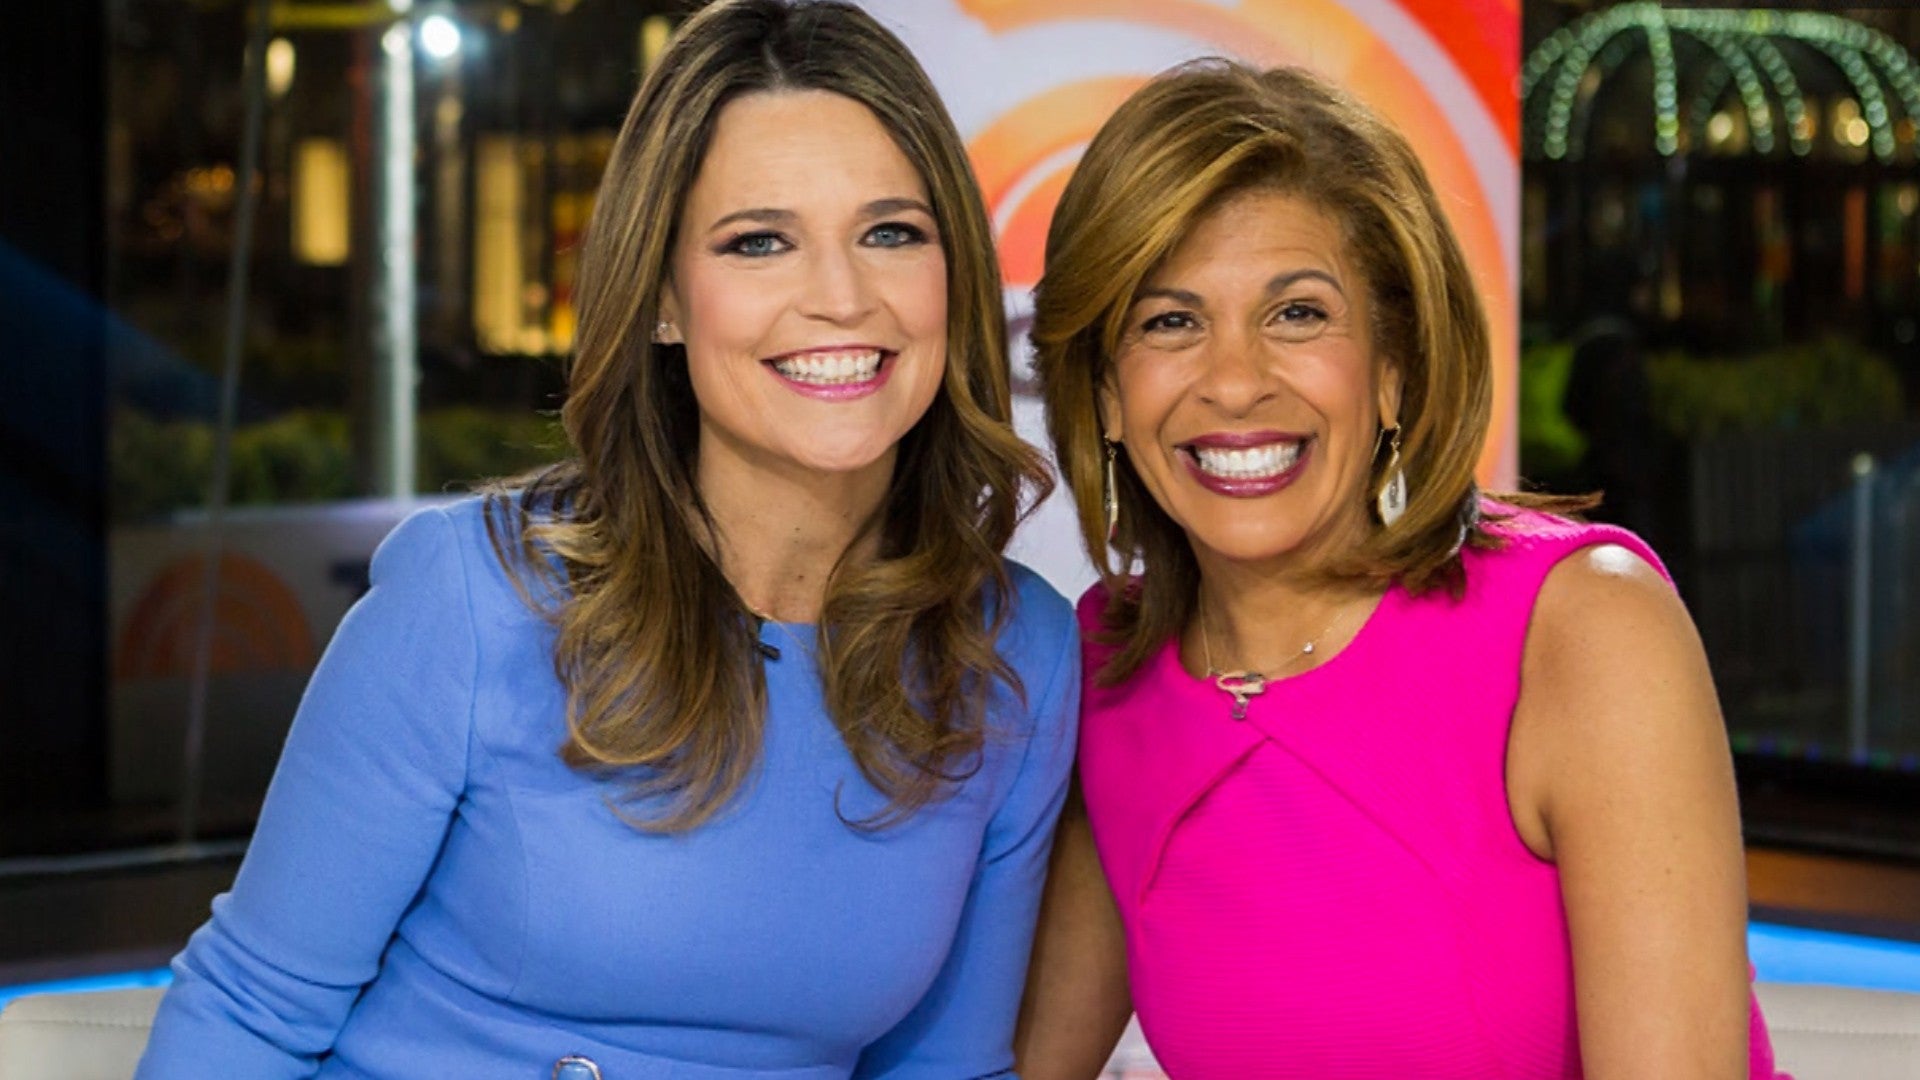 Hoda Kotb Salary Details Reportedly Revealed After She Takes Over 'Today'